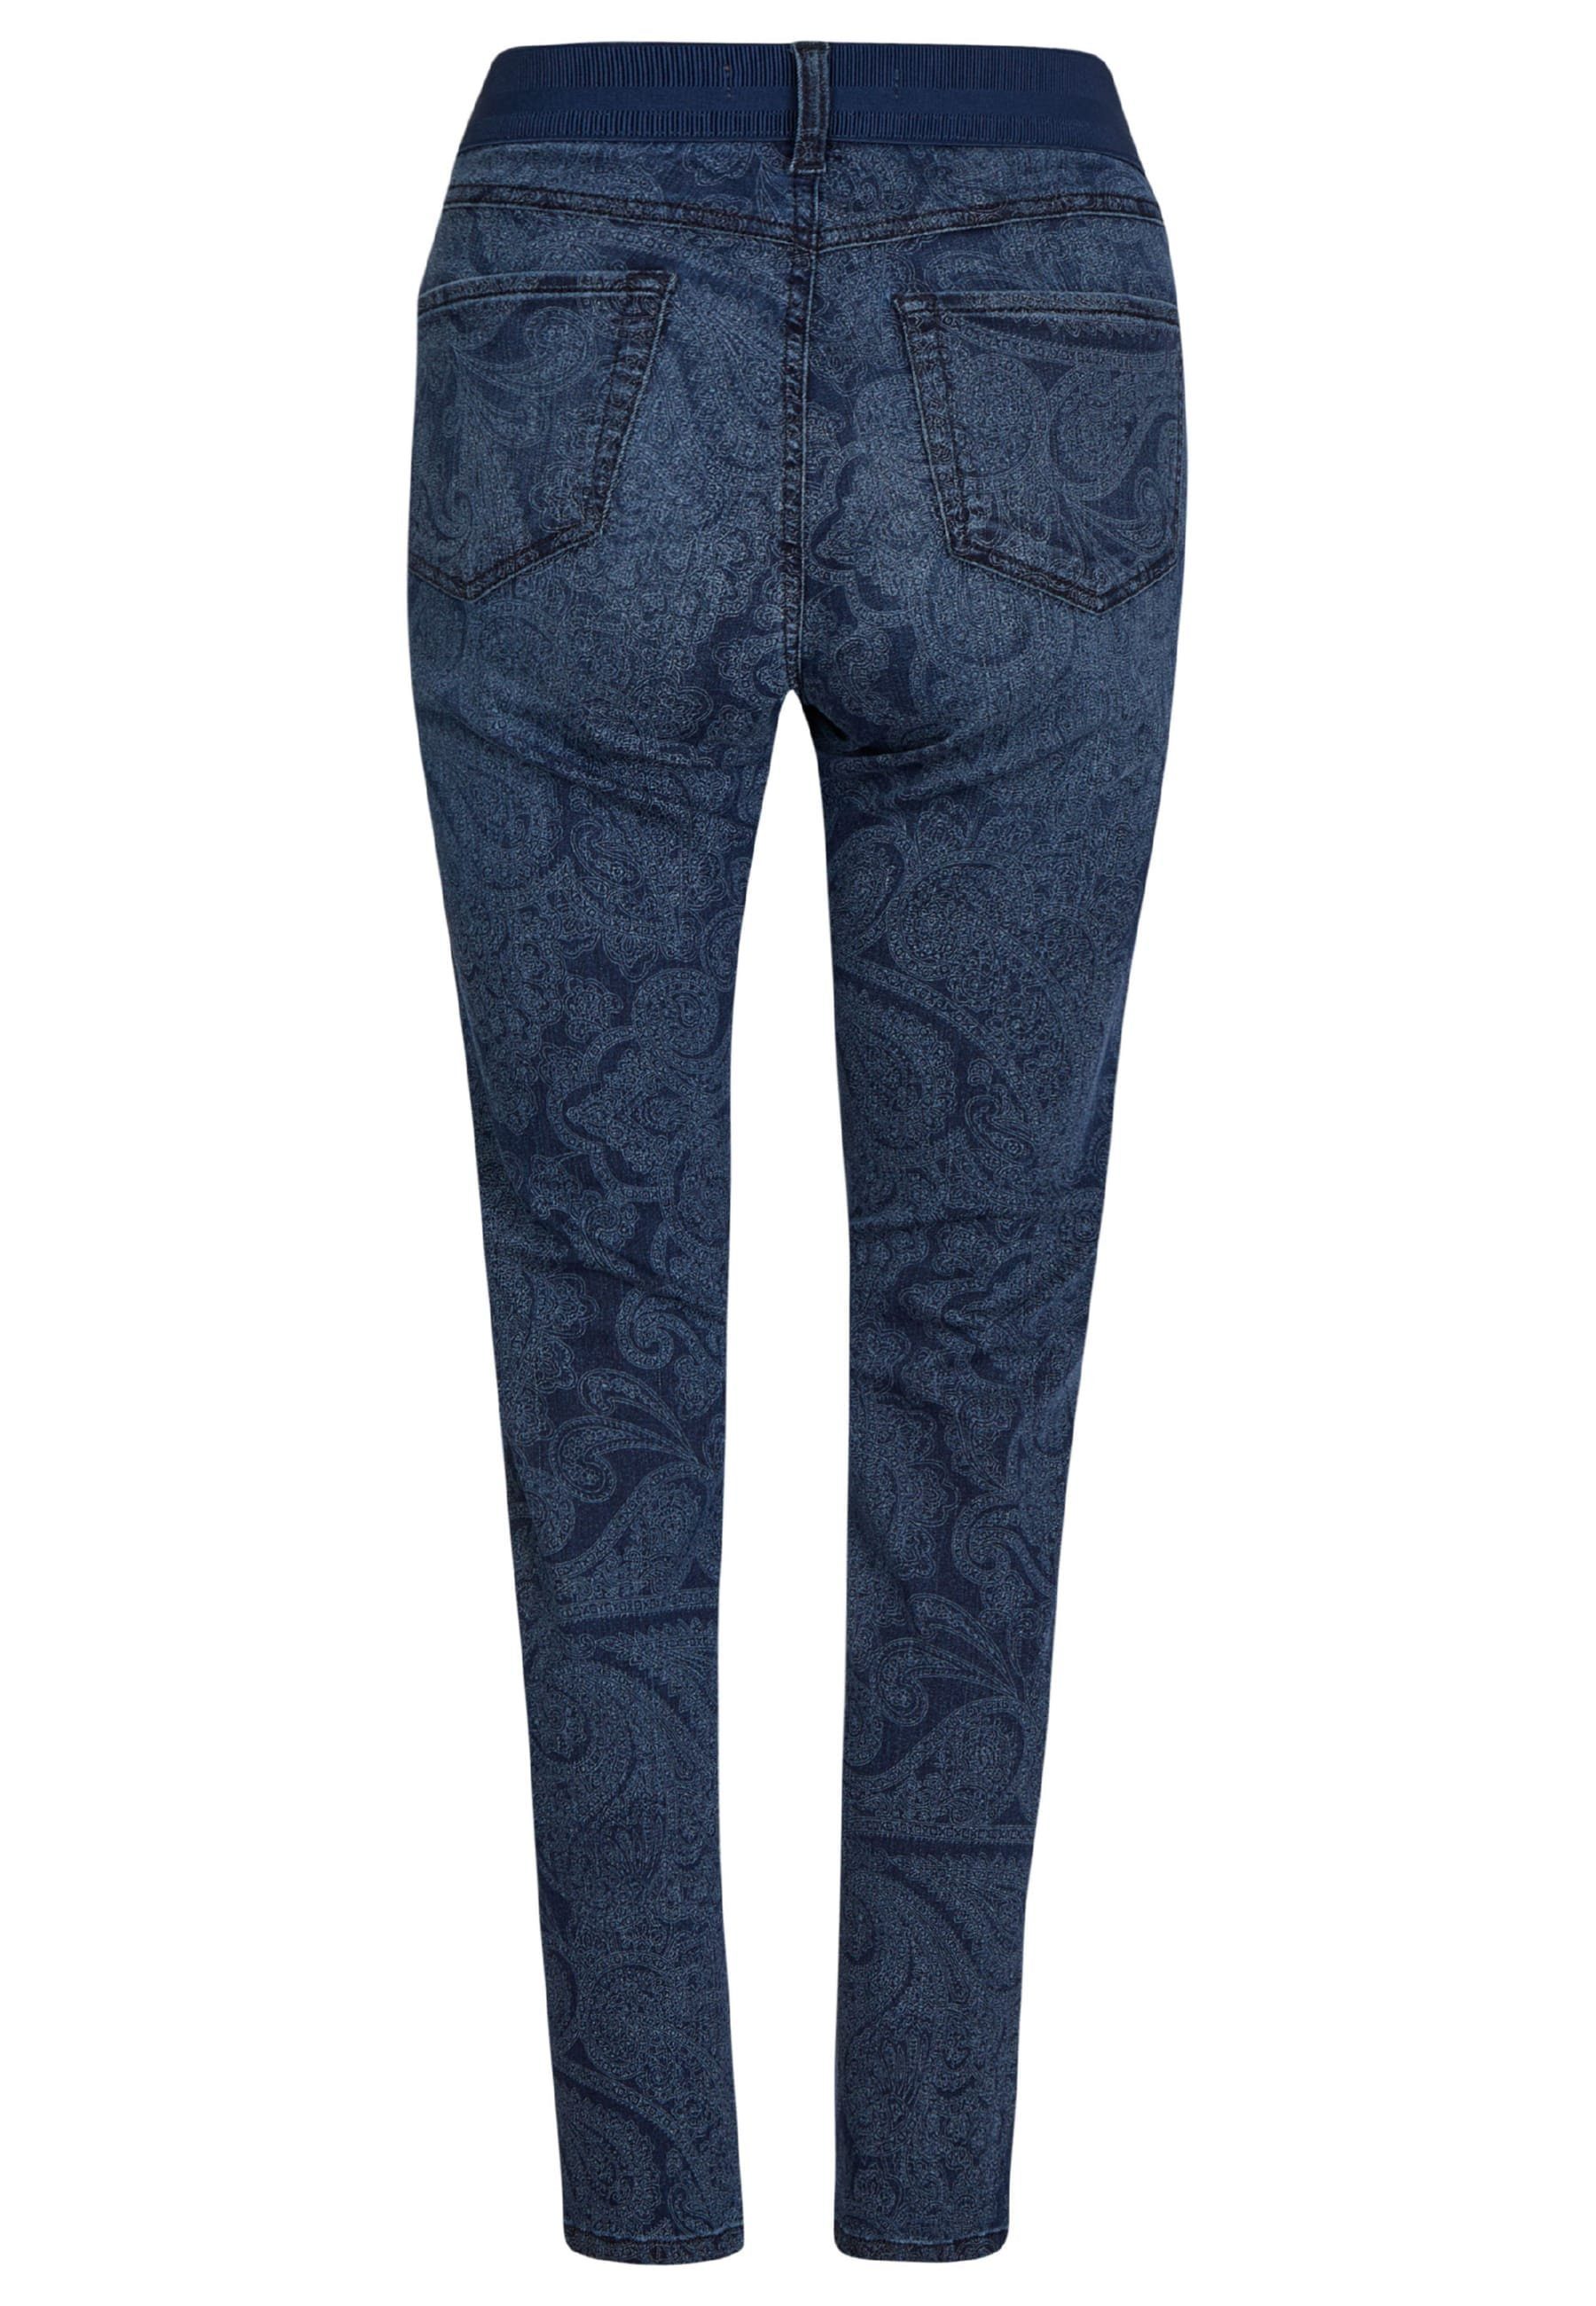 ANGELS Slim-fit-Jeans blue Paisley-Muster mit Label-Applikationen Size mit Jeans One